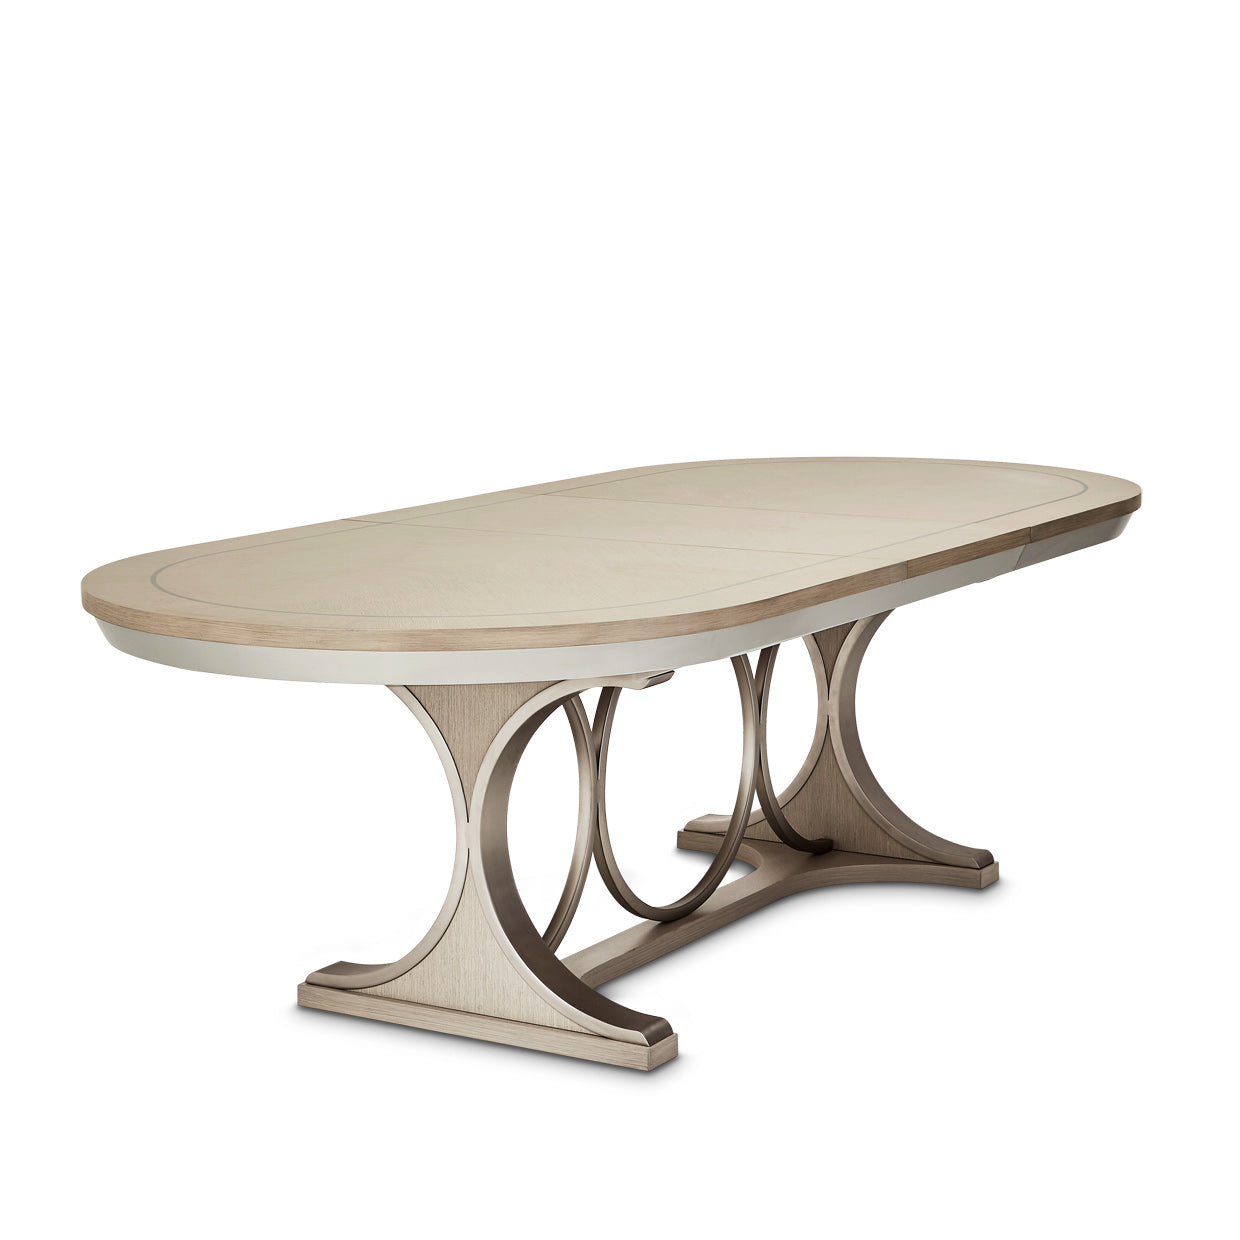 ECLIPSE Oval Dining Table - Dream art Gallery